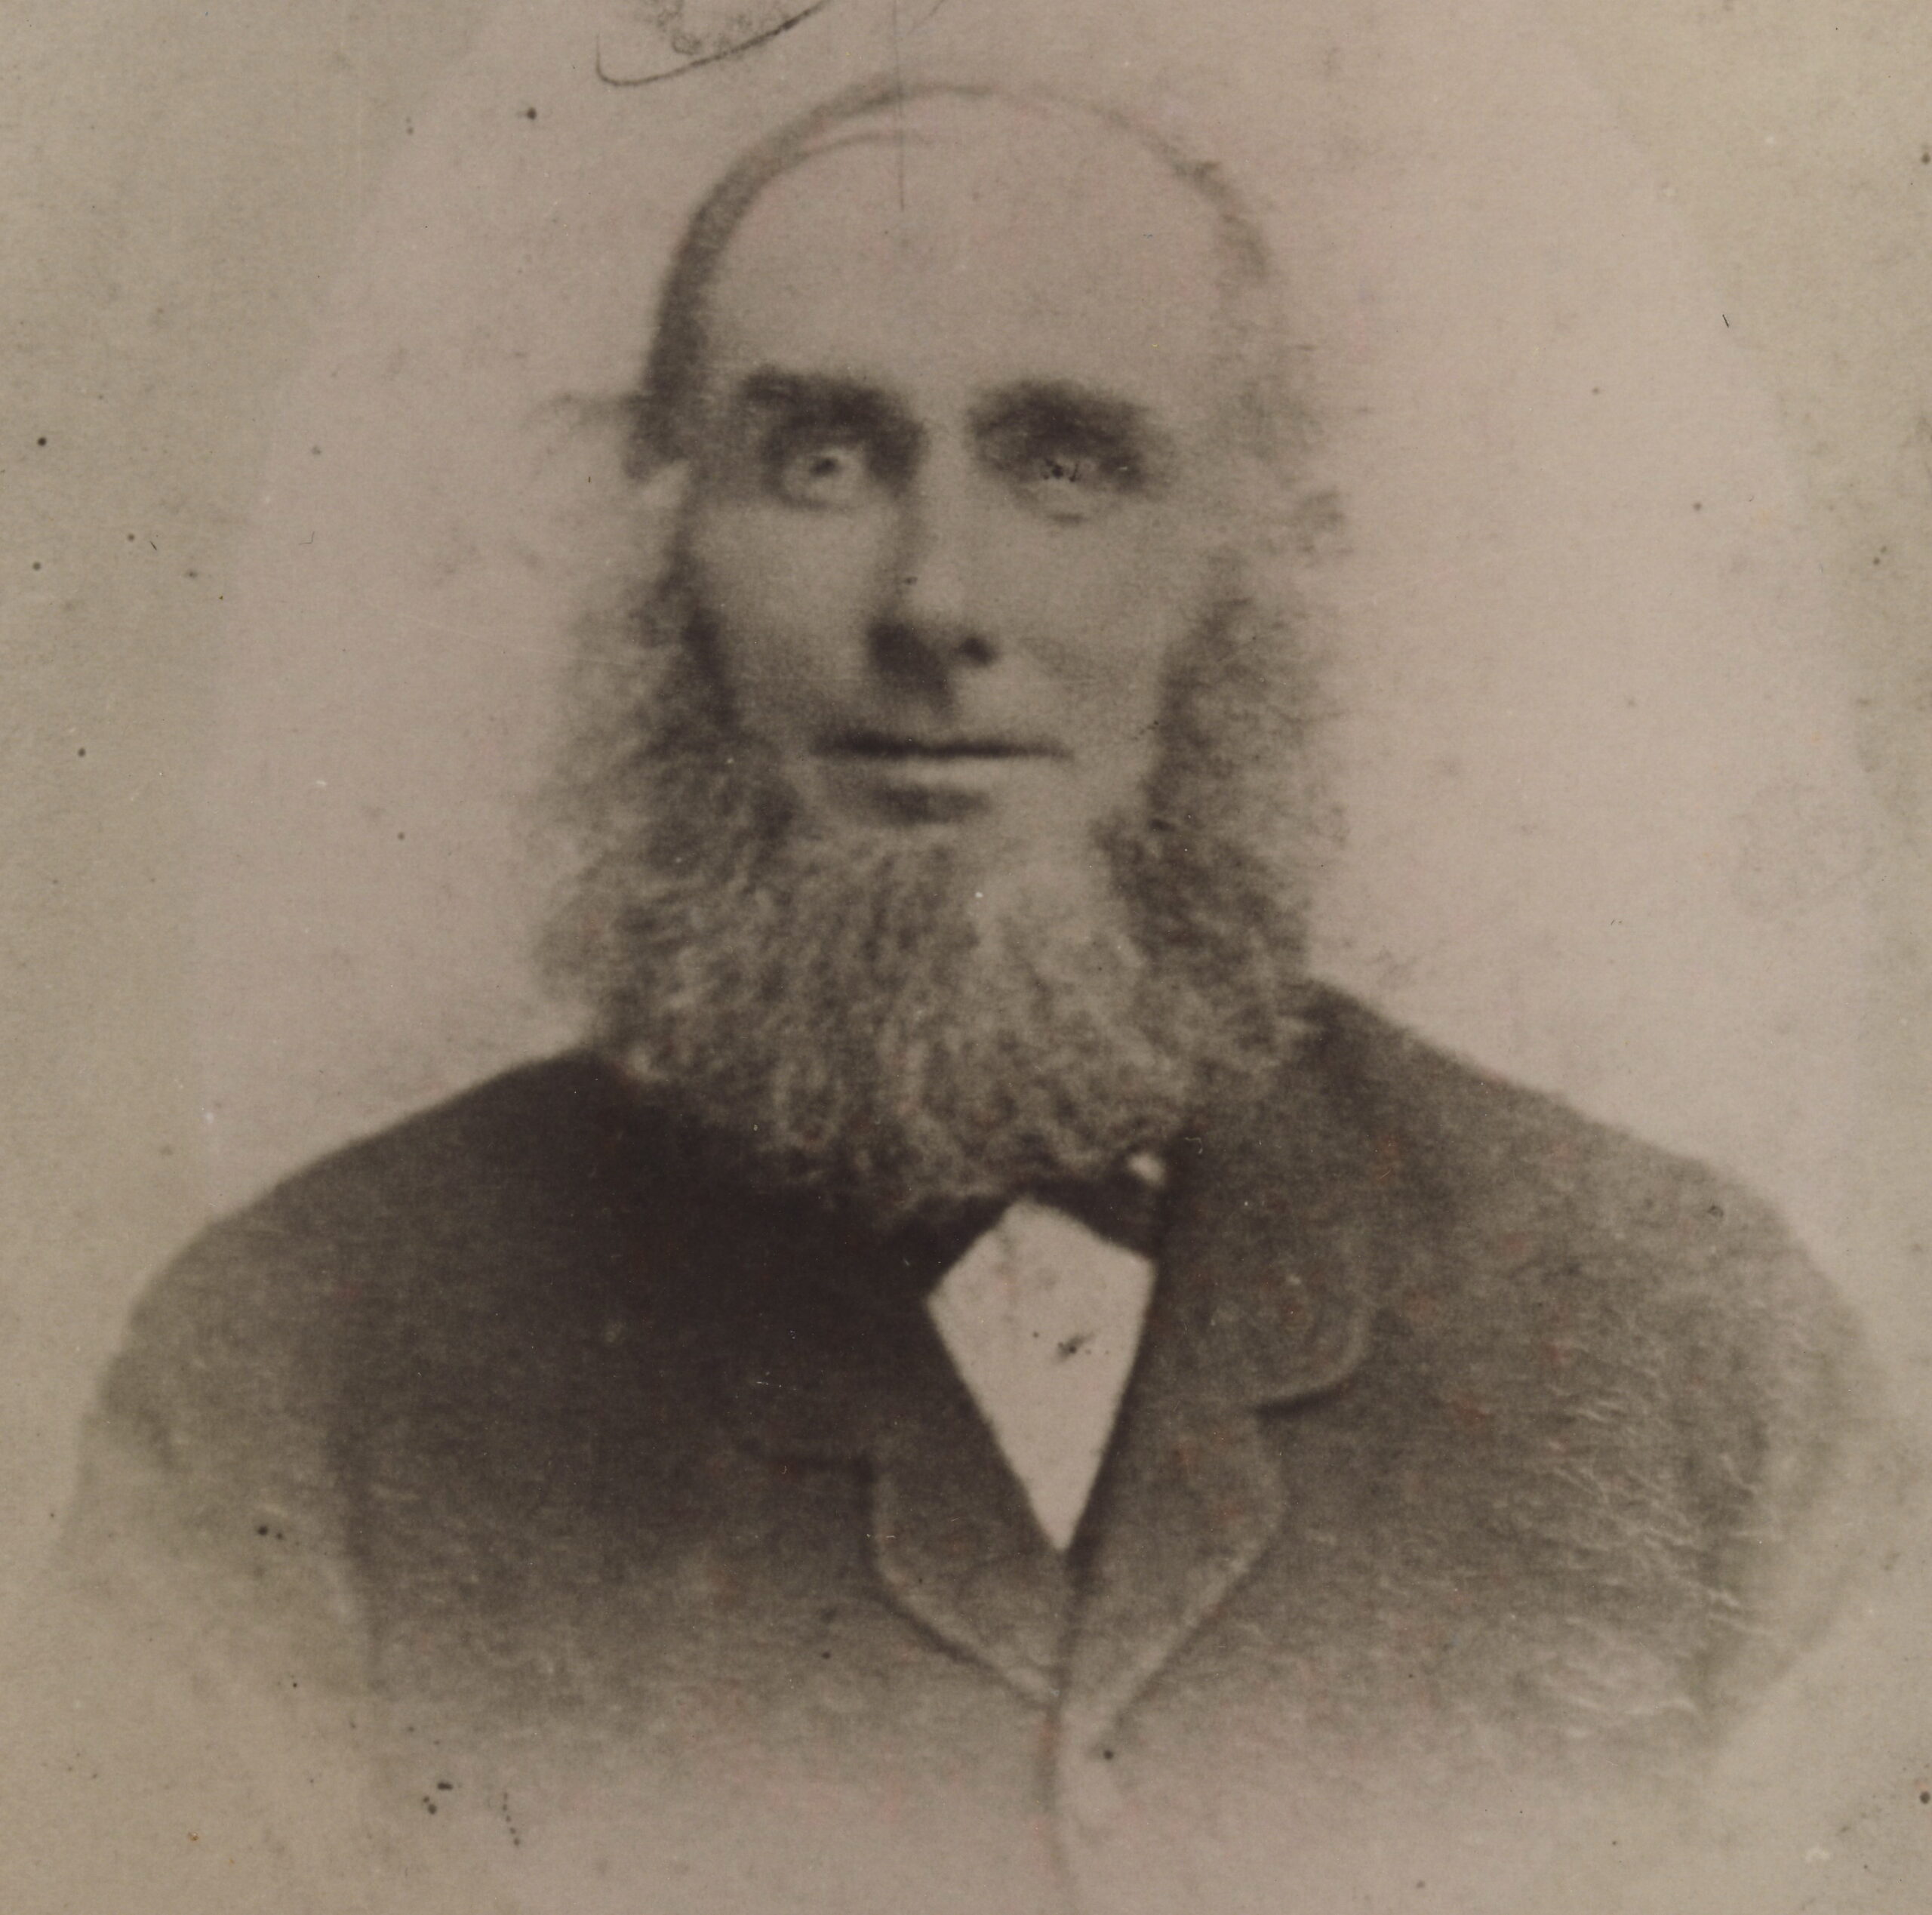 Image of Robert Owens from private collection of Leigh Owens